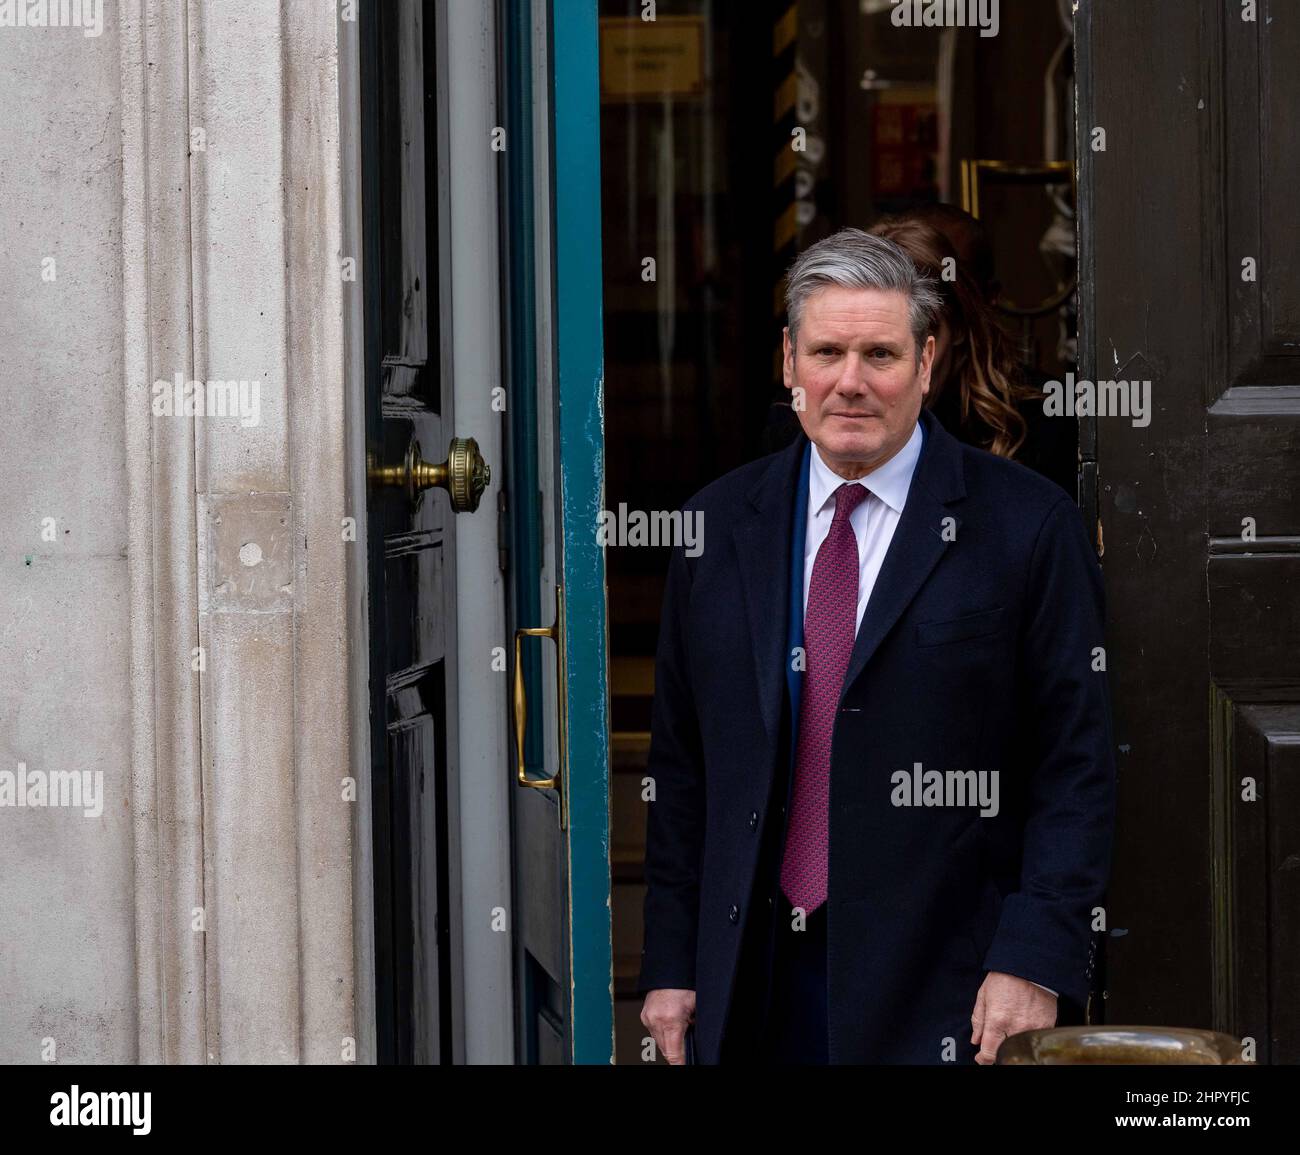 London, UK. 24th Feb, 2022. Opposition leaders at the Cabinet office for a briefing on the Ukraine situation. Kier Starmer Leader of the Labour party Credit: Ian Davidson/Alamy Live News Stock Photo